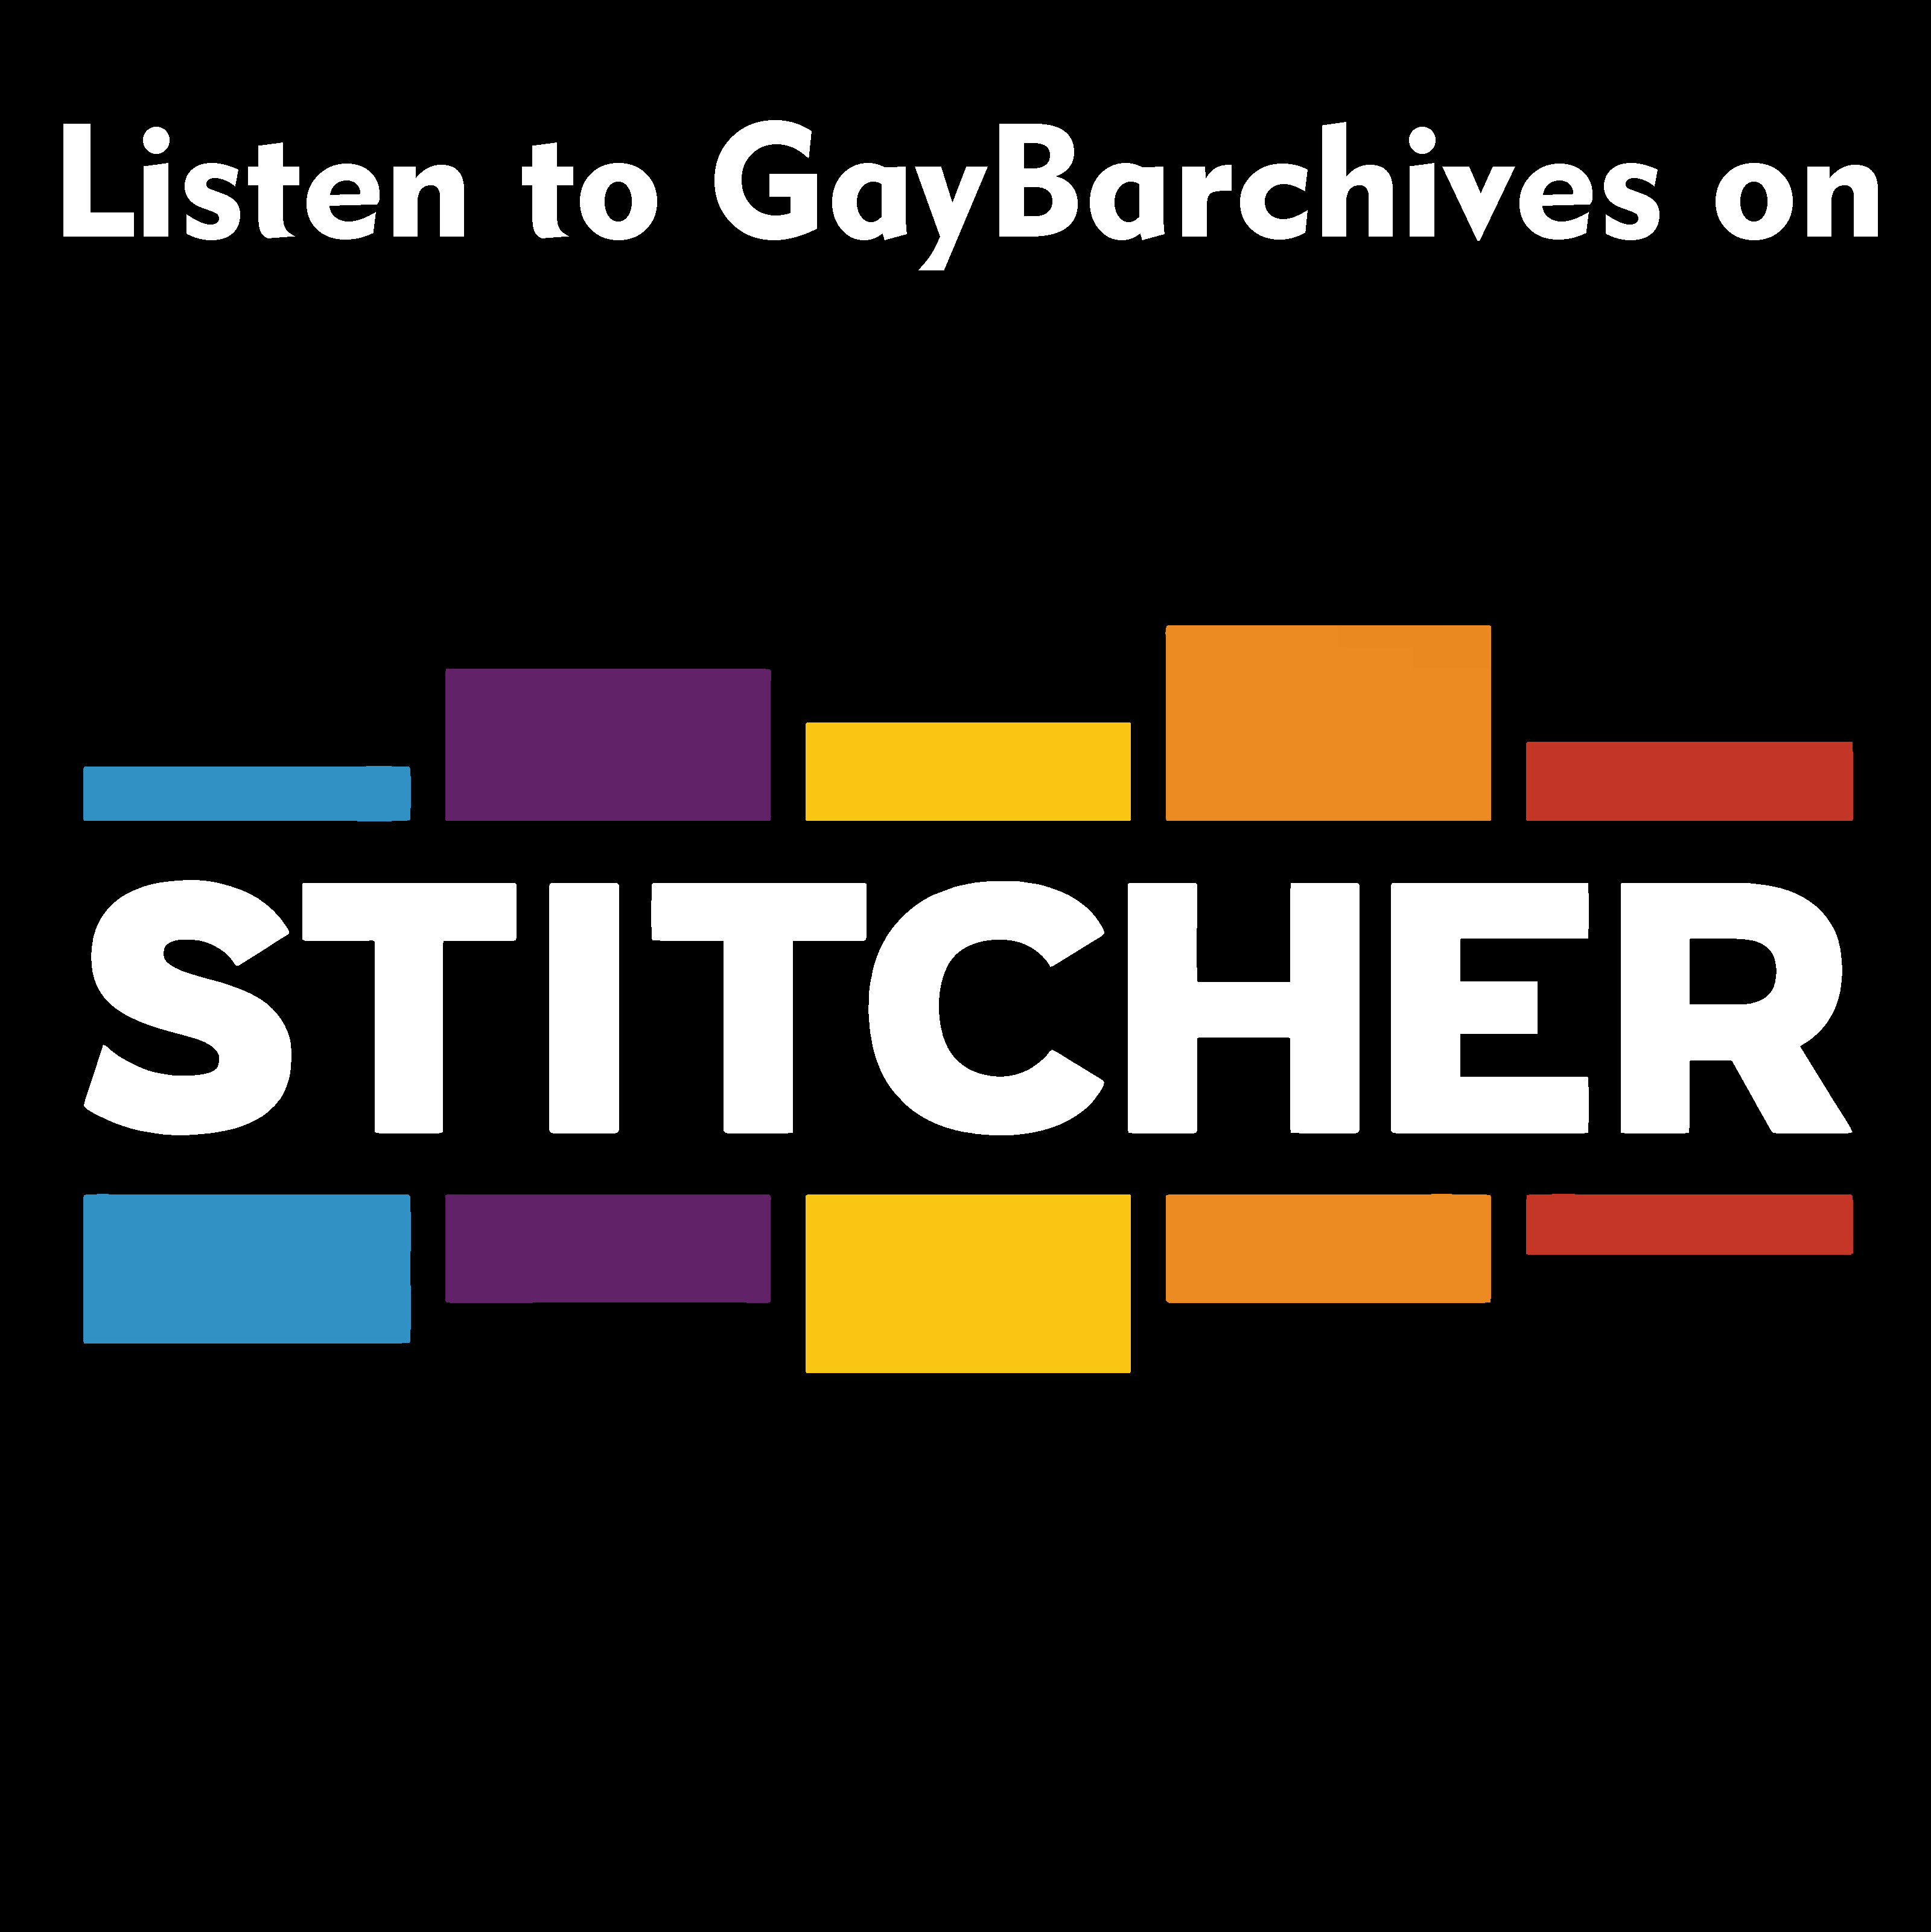 Listen to the Gay Barchives podcast on Stitcher #lgbthistory #gaybarchives